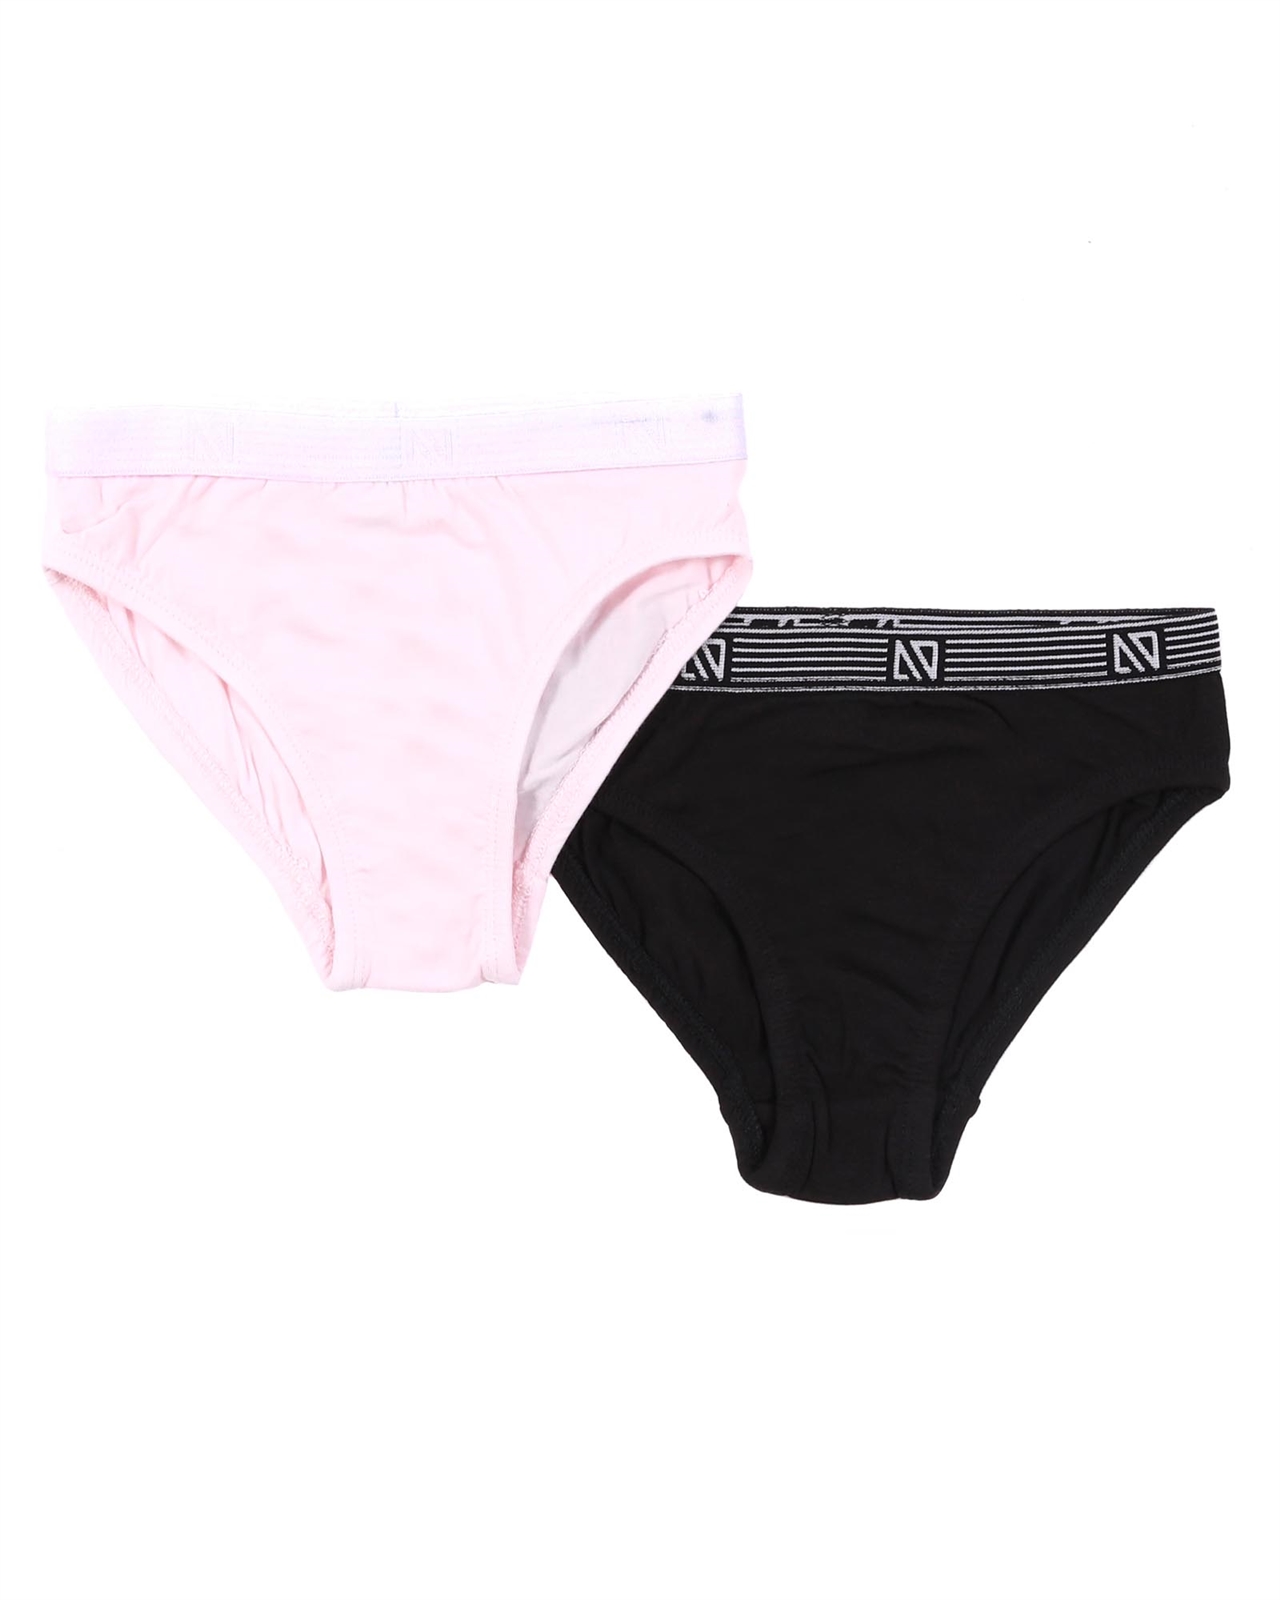 Juicy Couture Intimates Panties | sz. Large 3 Pack | NWT